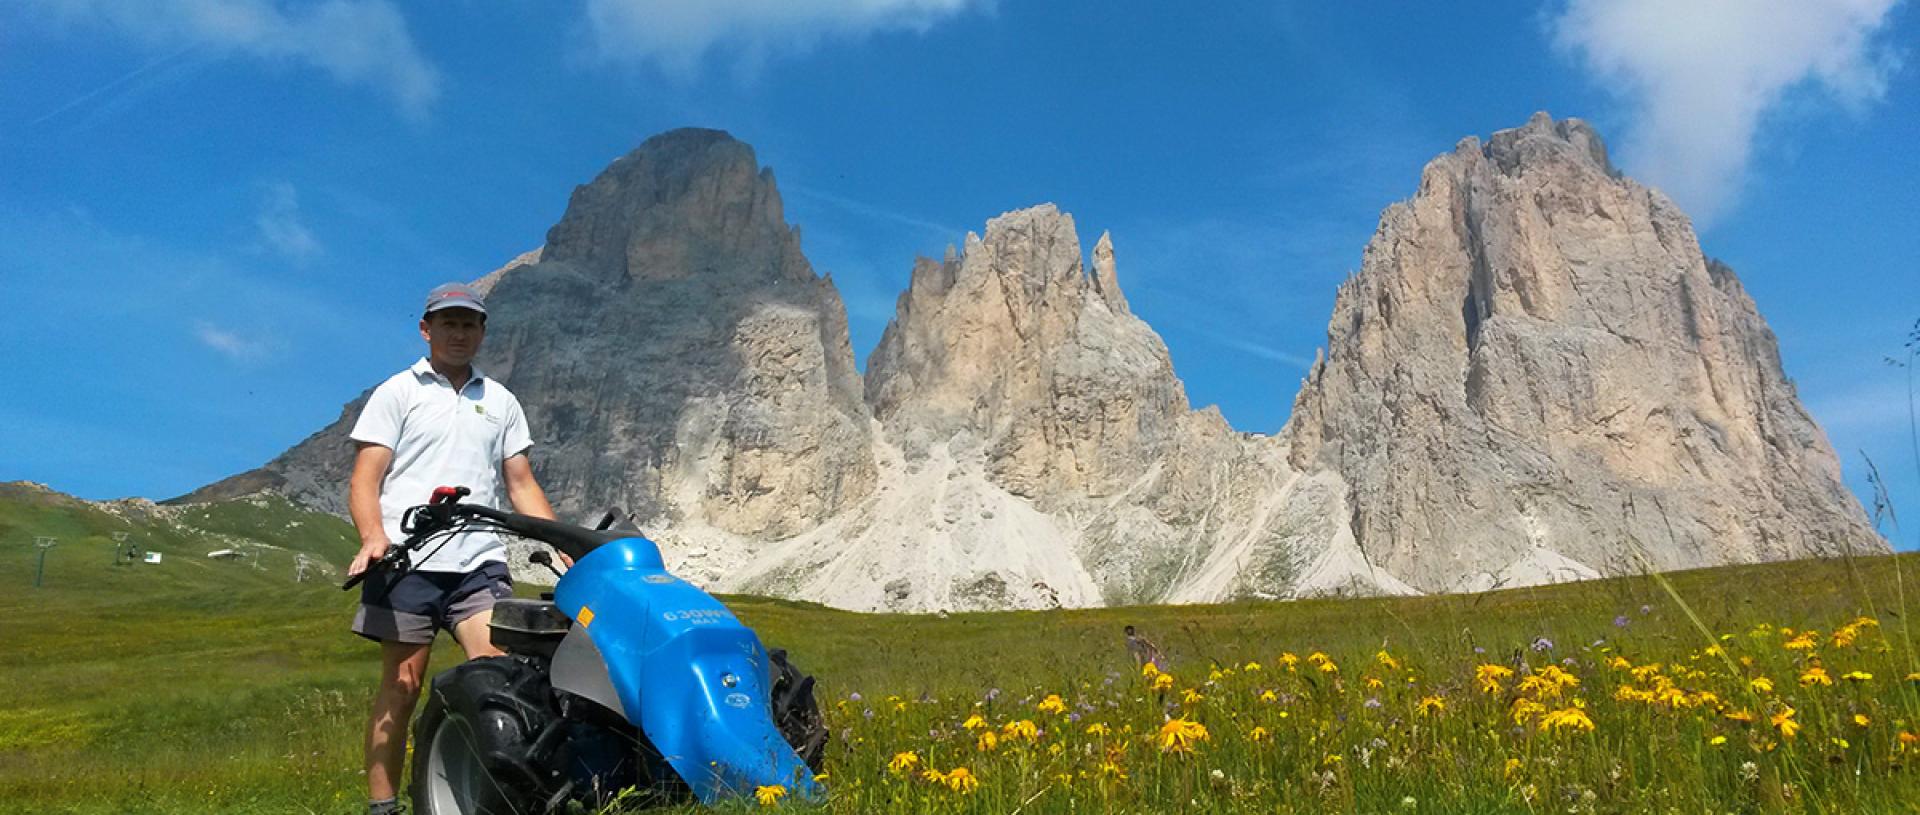 Haymaking in the Dolomites